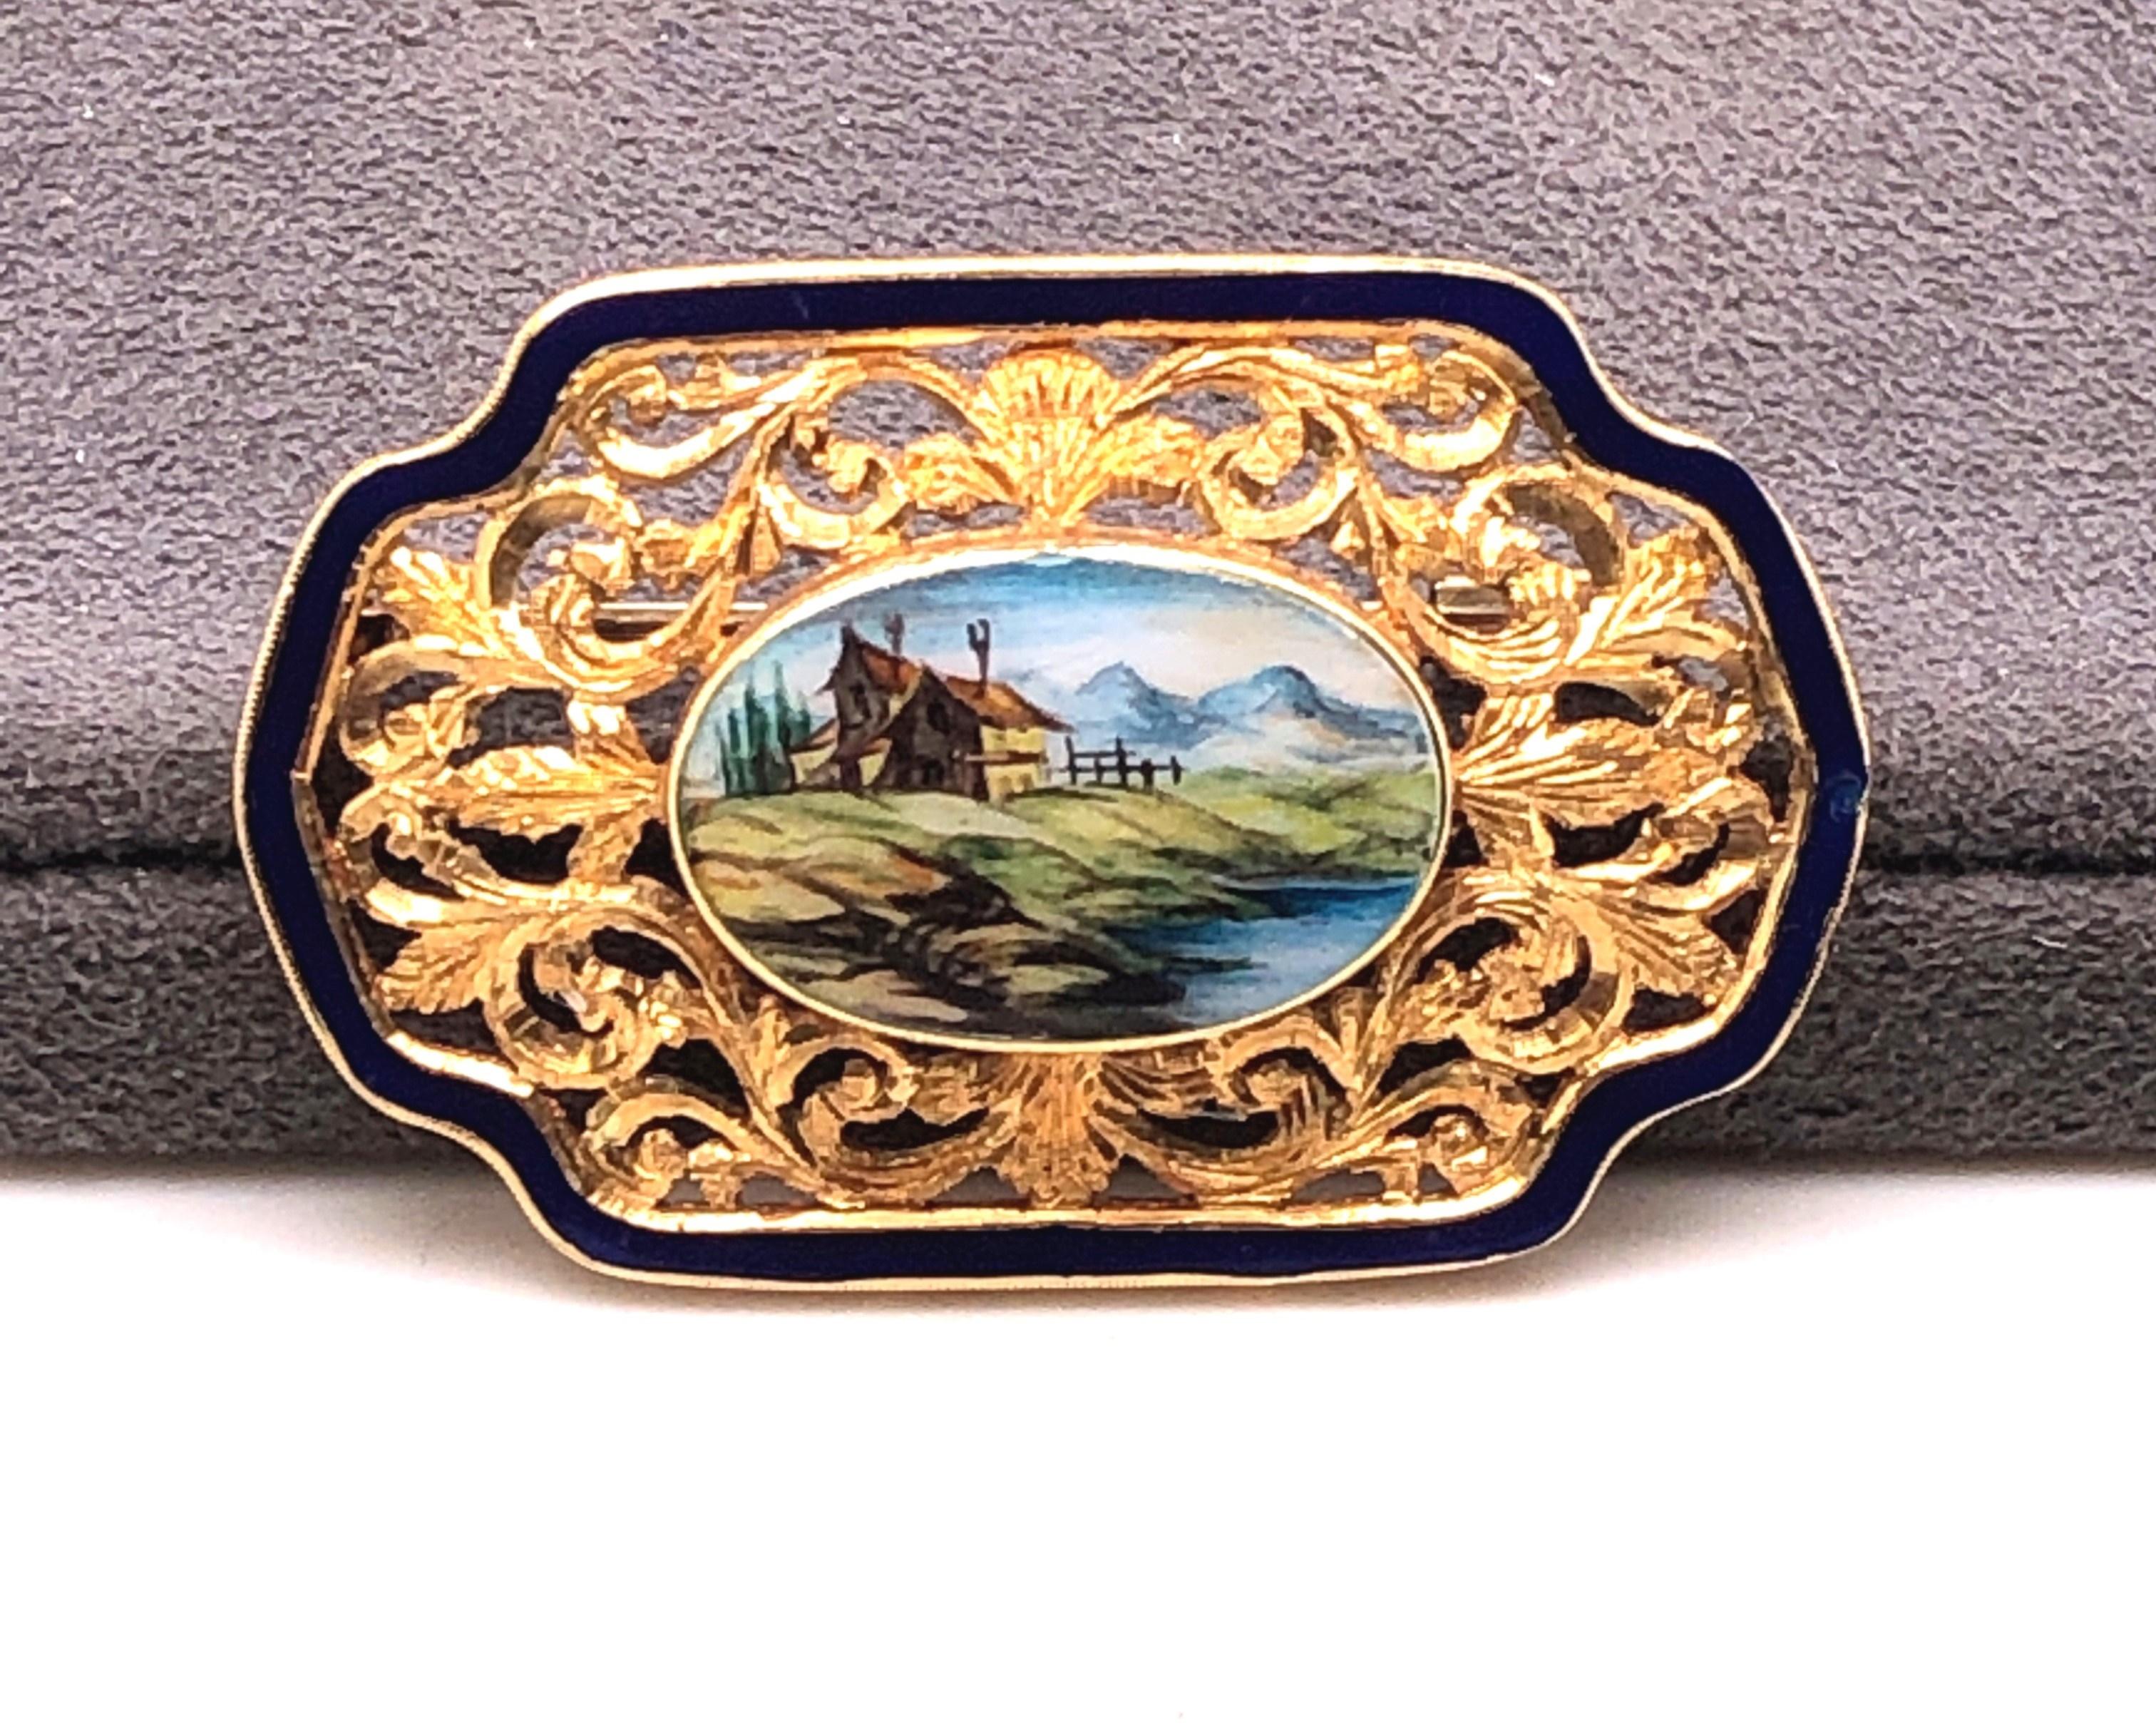 18kt yellow gold Swiss Sylvan Setting Enamel Brooch with Cobalt blue enamel Surround.

This brooch is Victorian and the original patina has been left on the reverse.